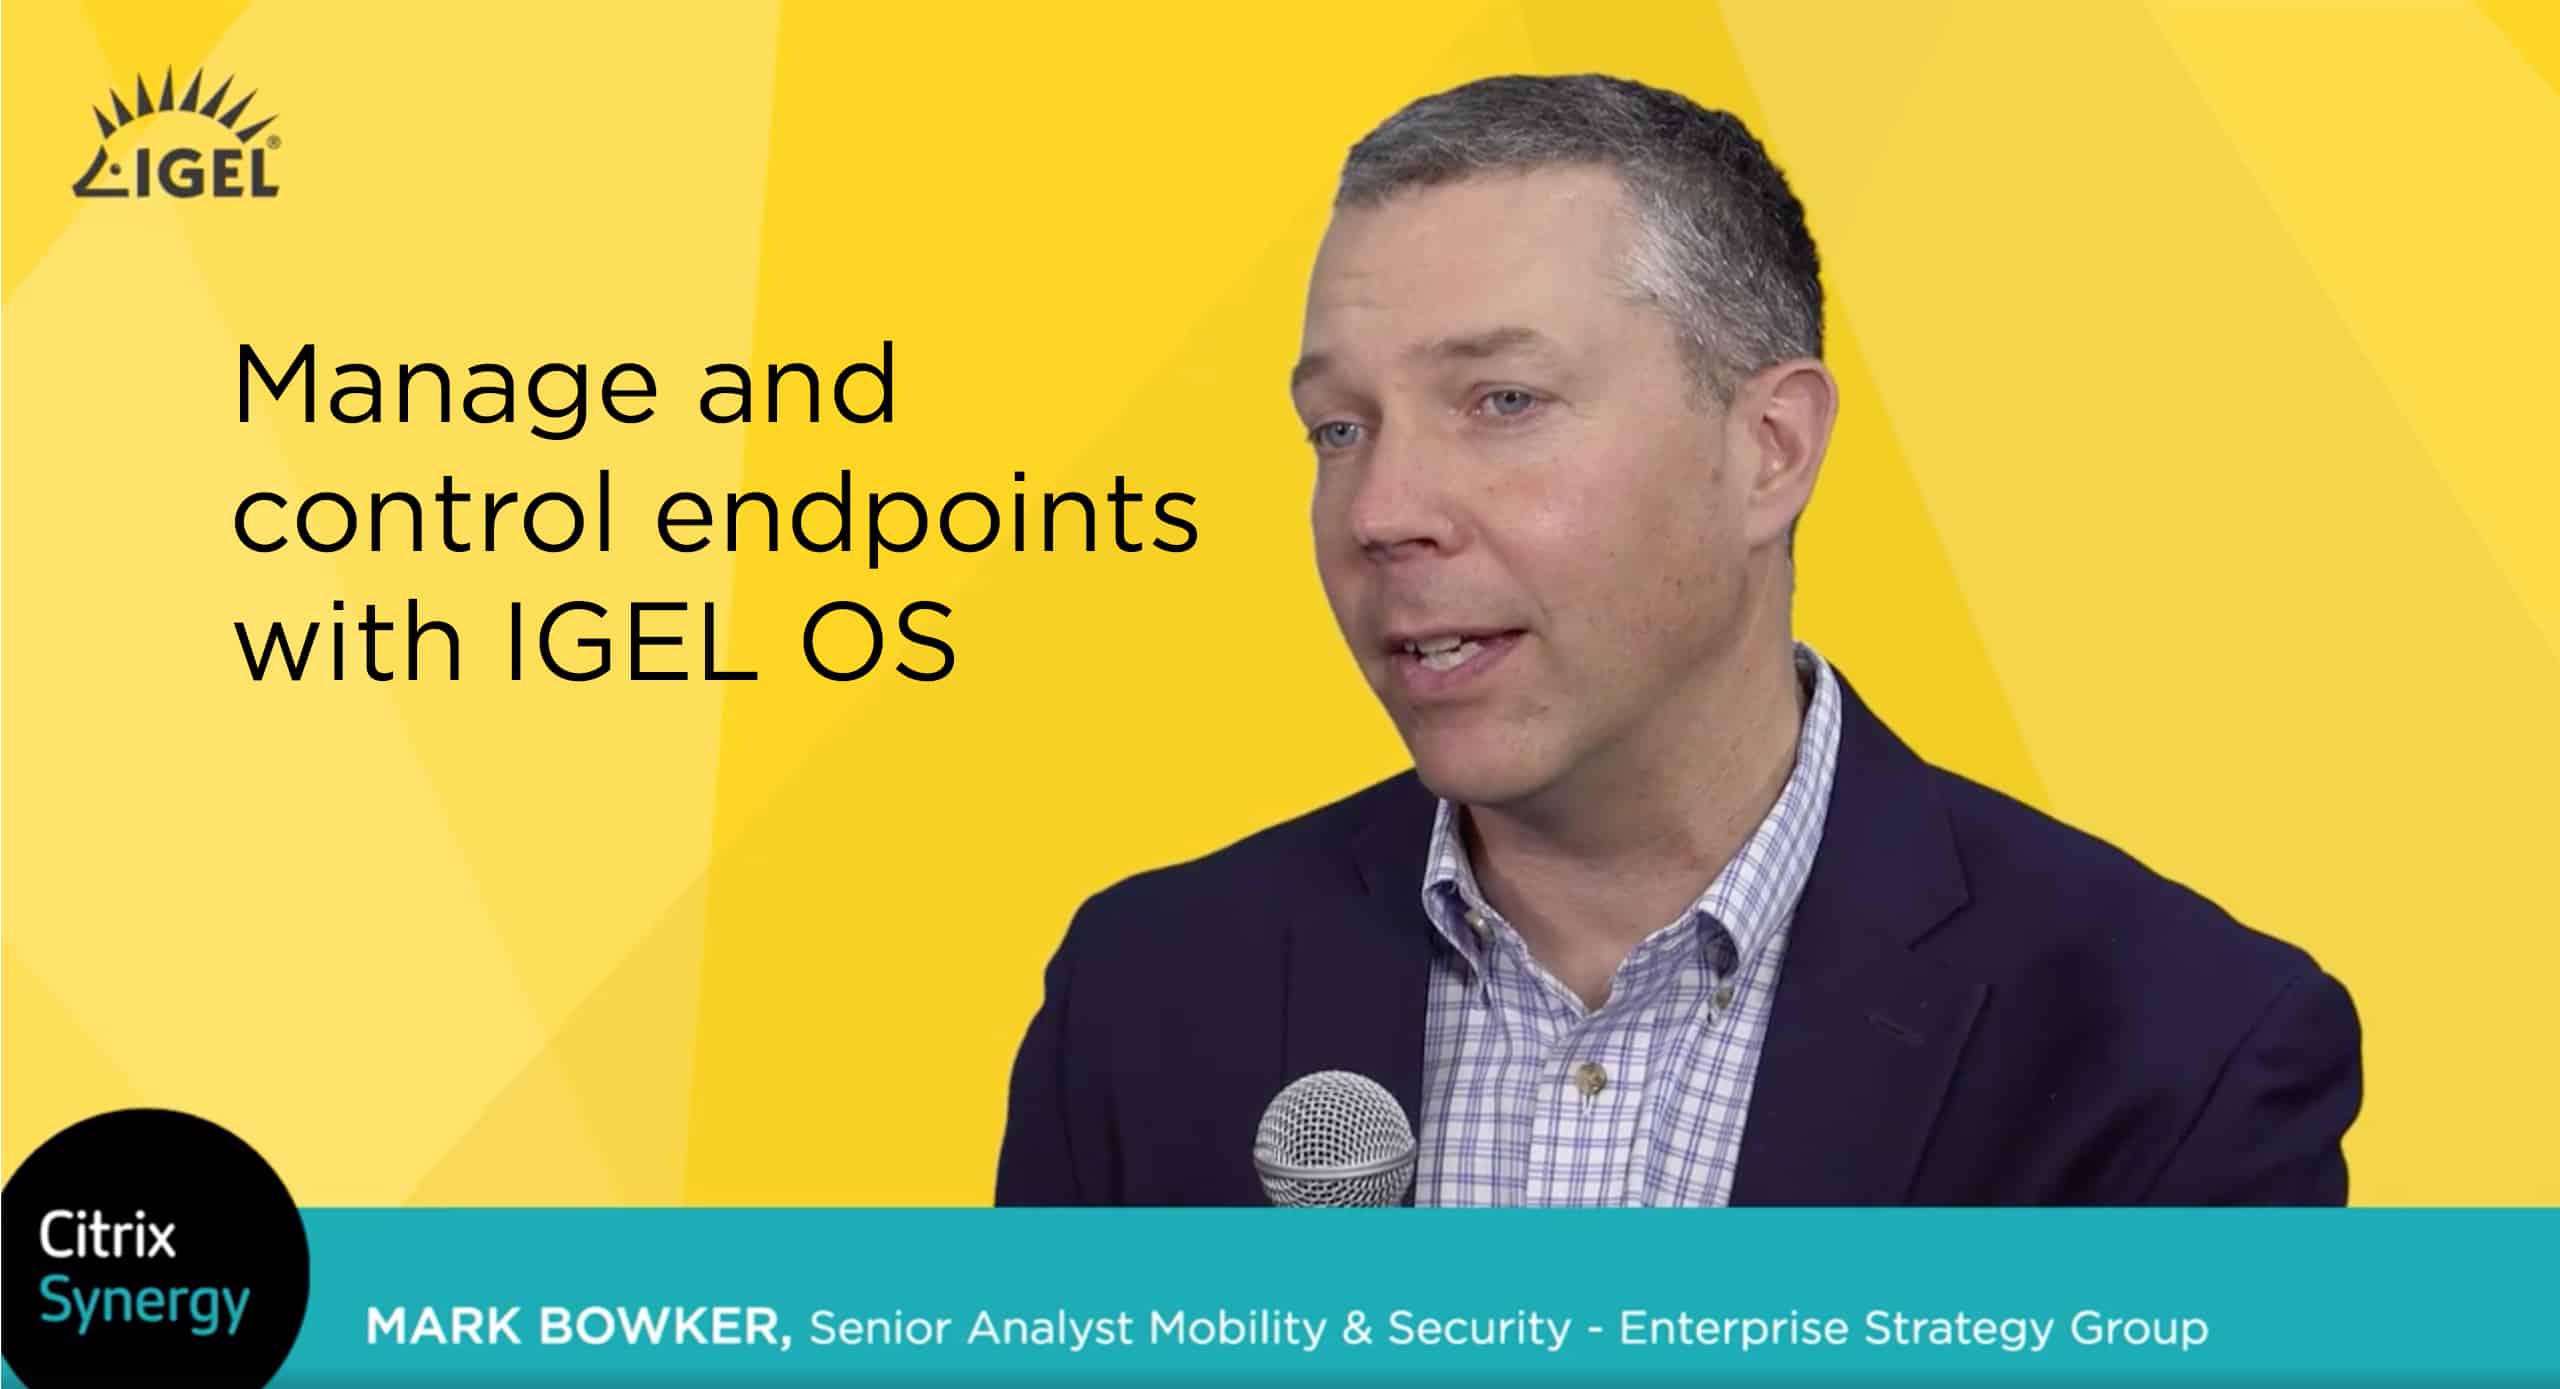 Manage and control endpoints with IGEL OS